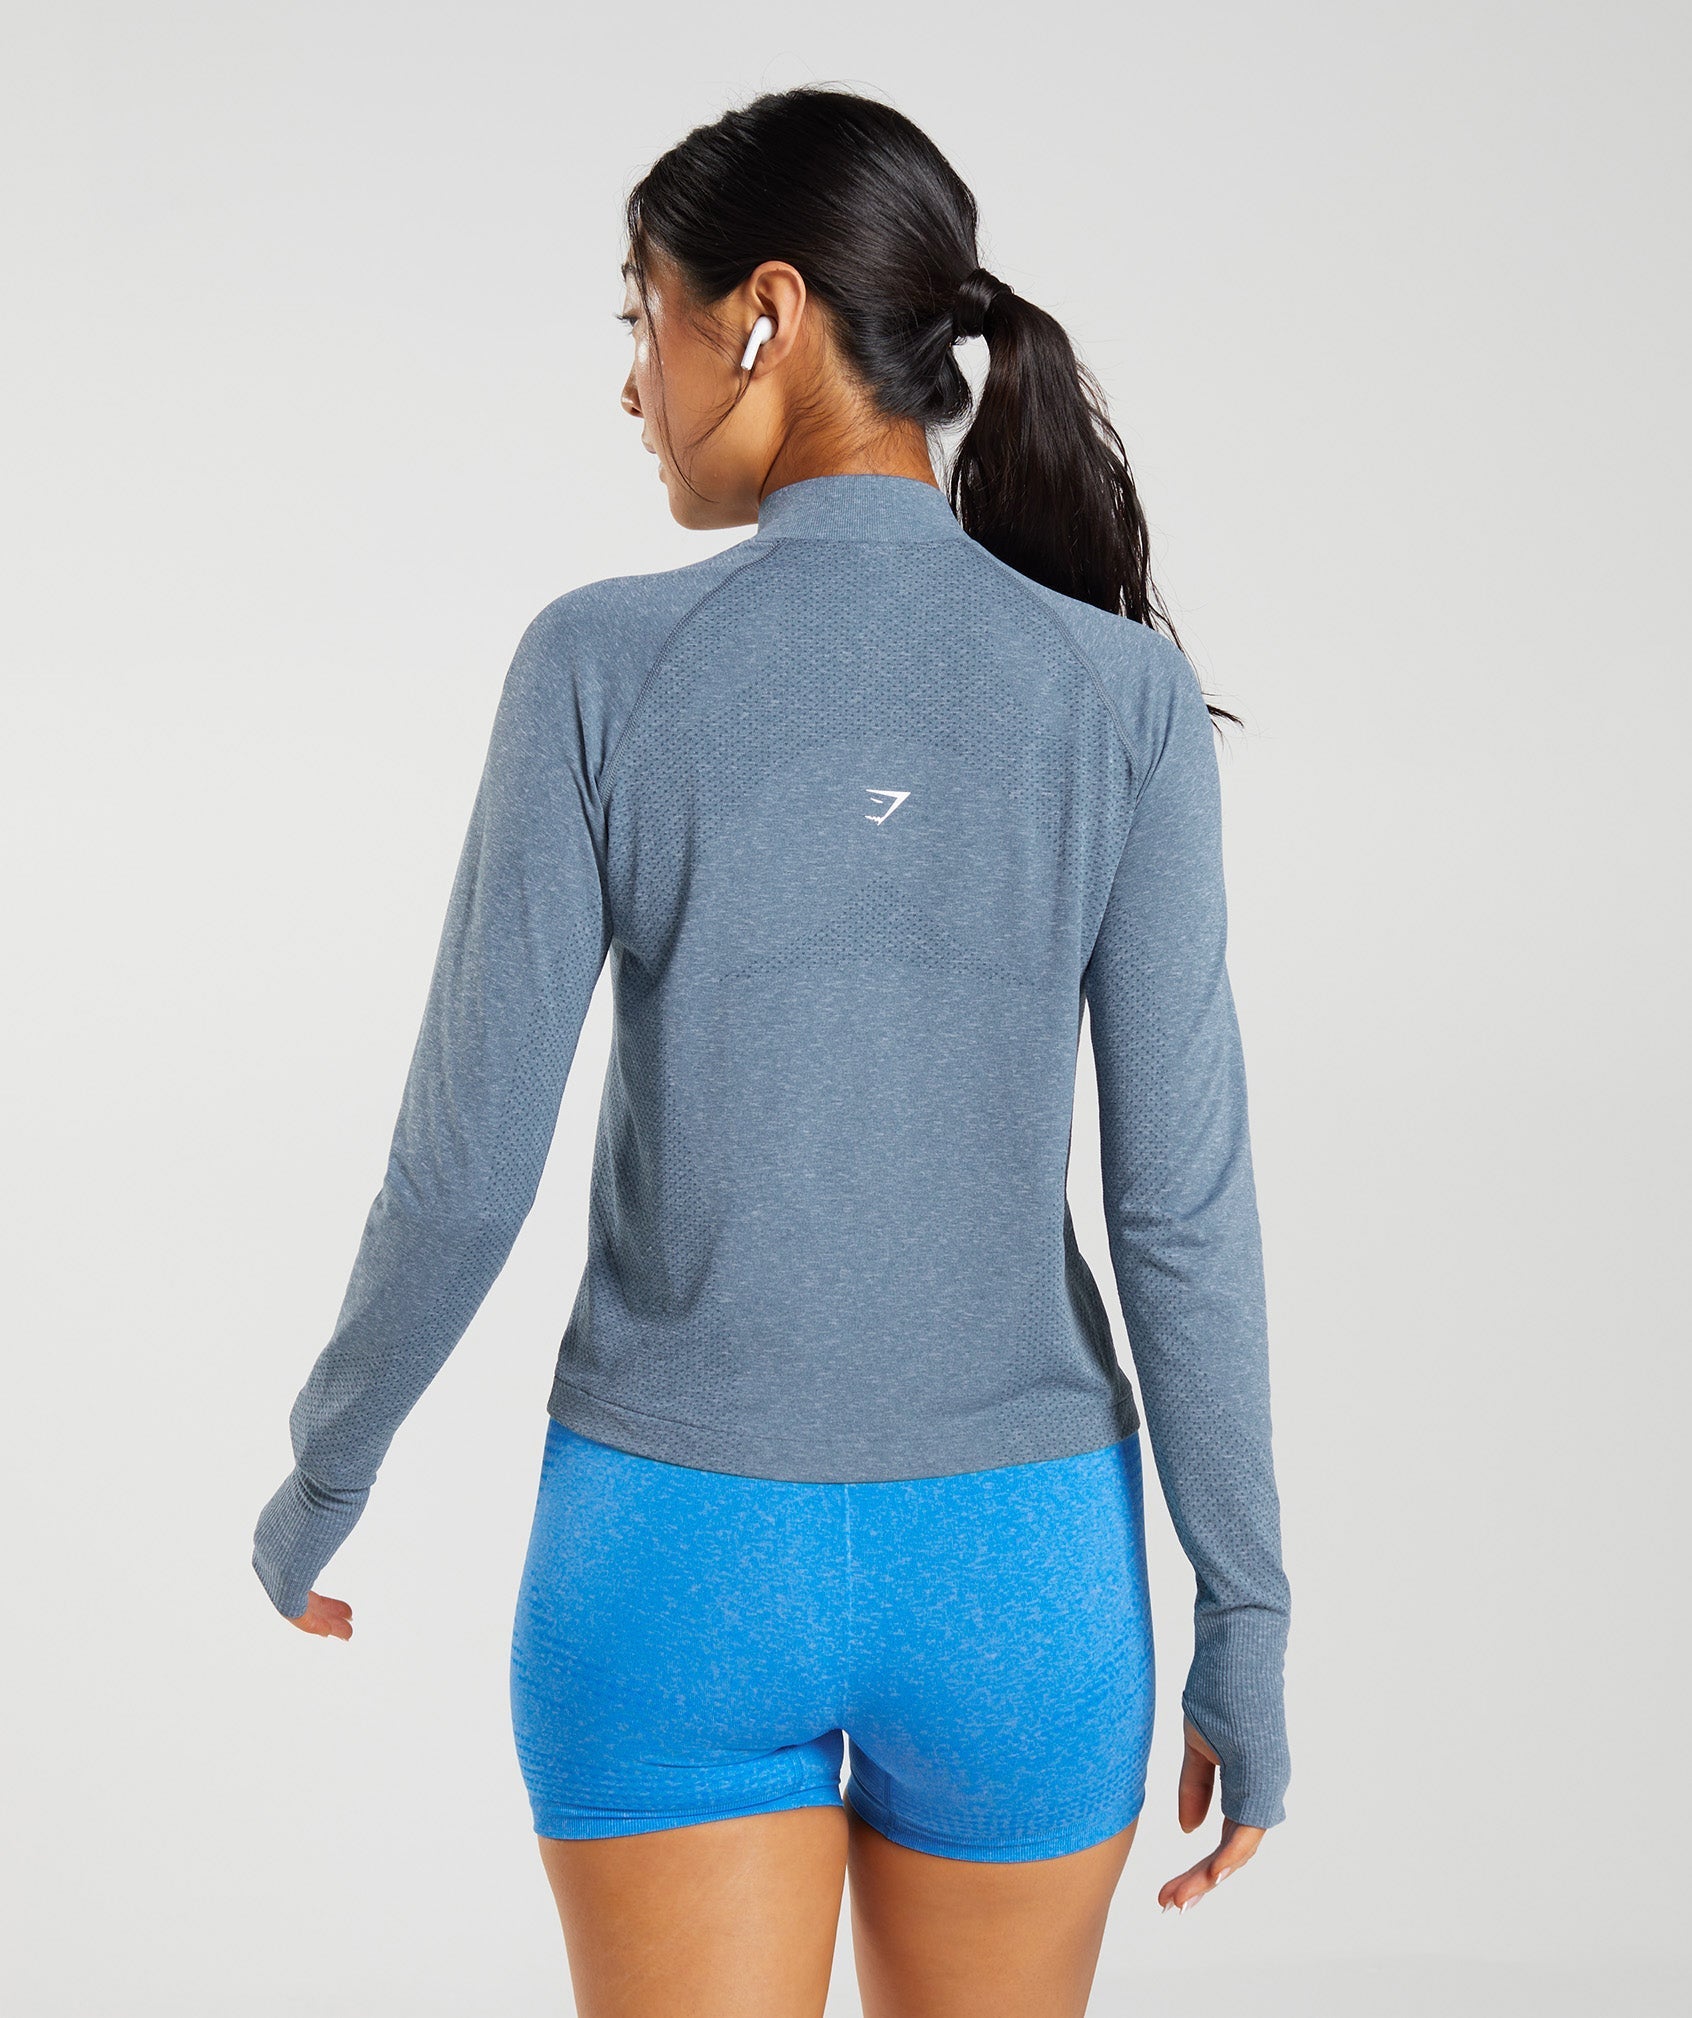 Vital Seamless 2.0 1/4 Track Top in Evening Blue Marl - view 2